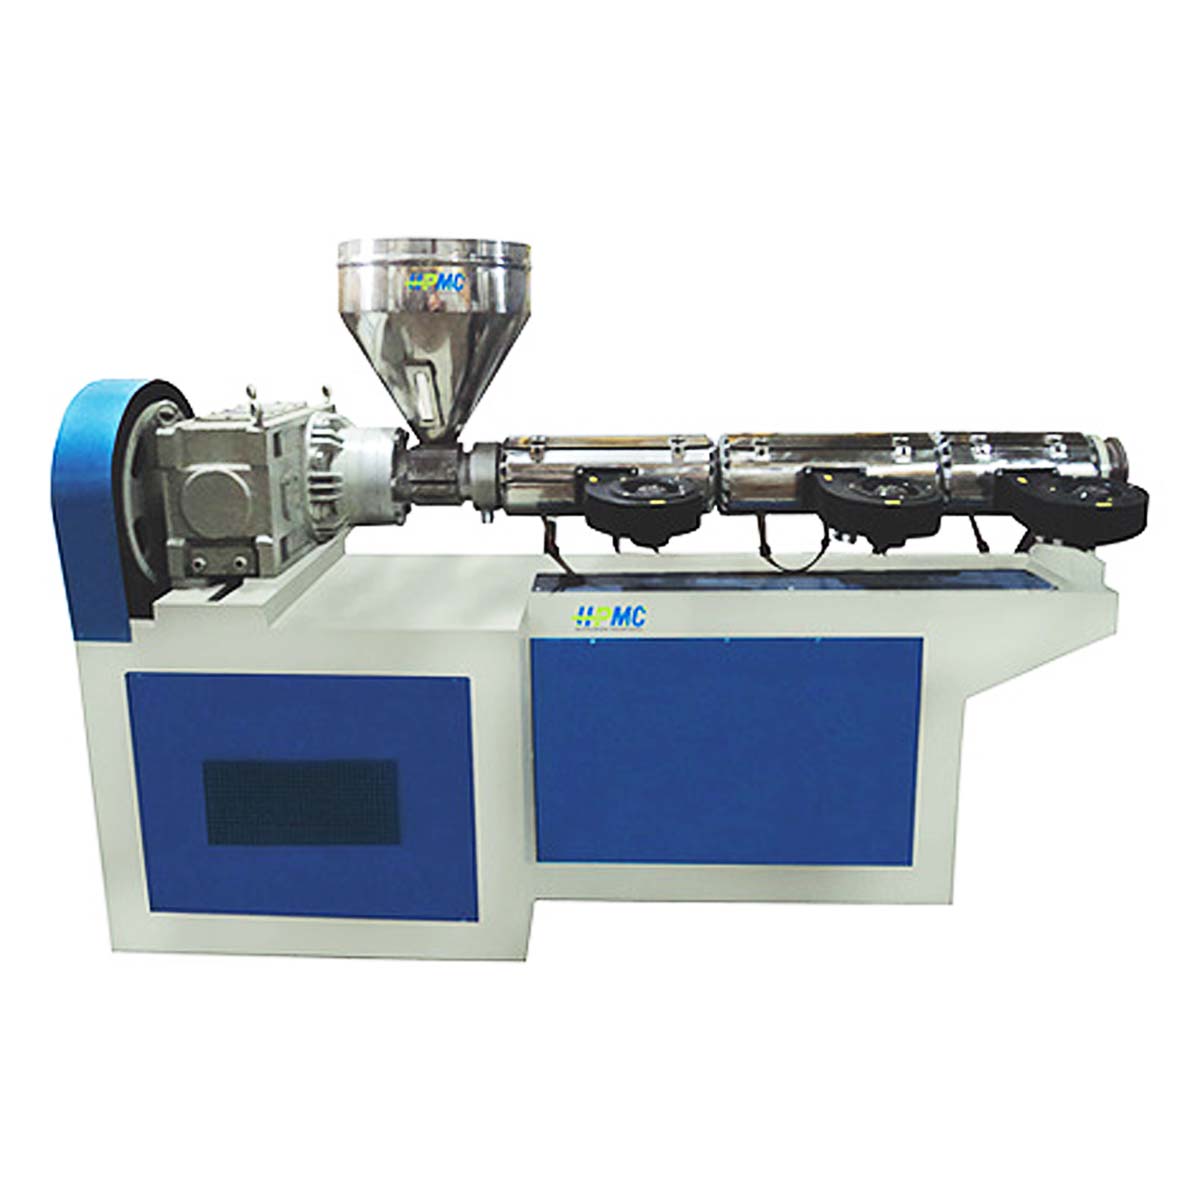 PVC Pipe Machine Manufacturers, Suppliers and Exporters in Delhi